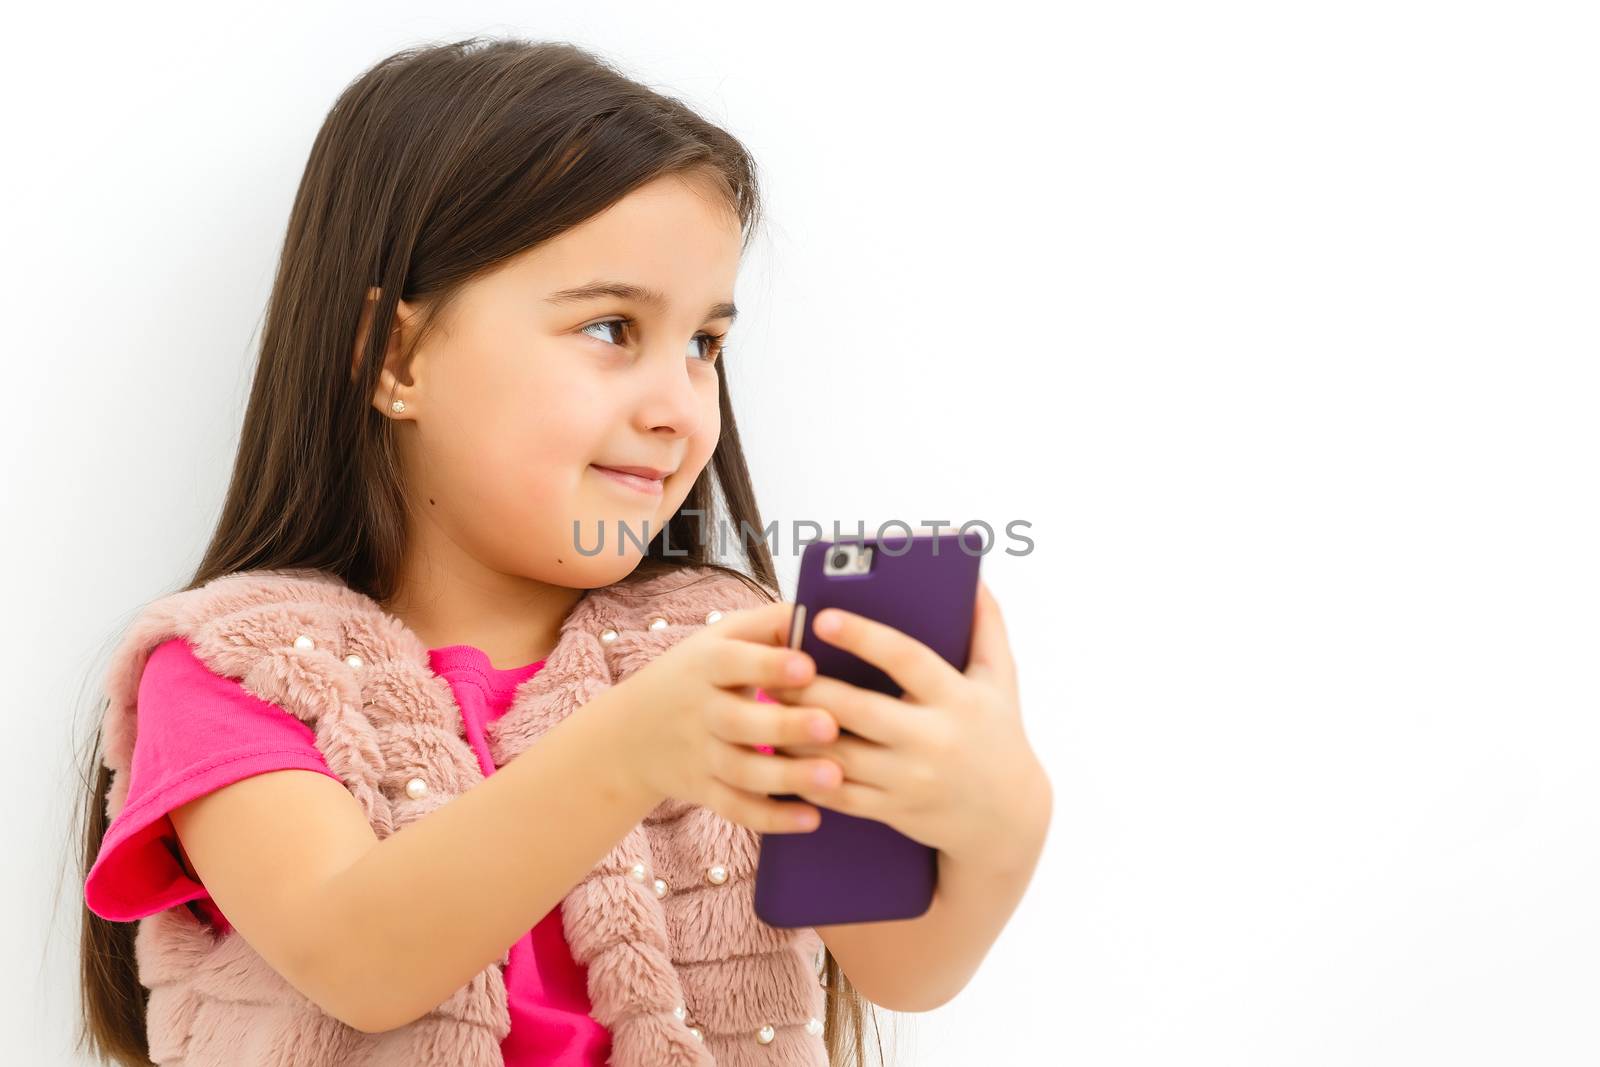 Little girl holding a smart phone against white background by Andelov13